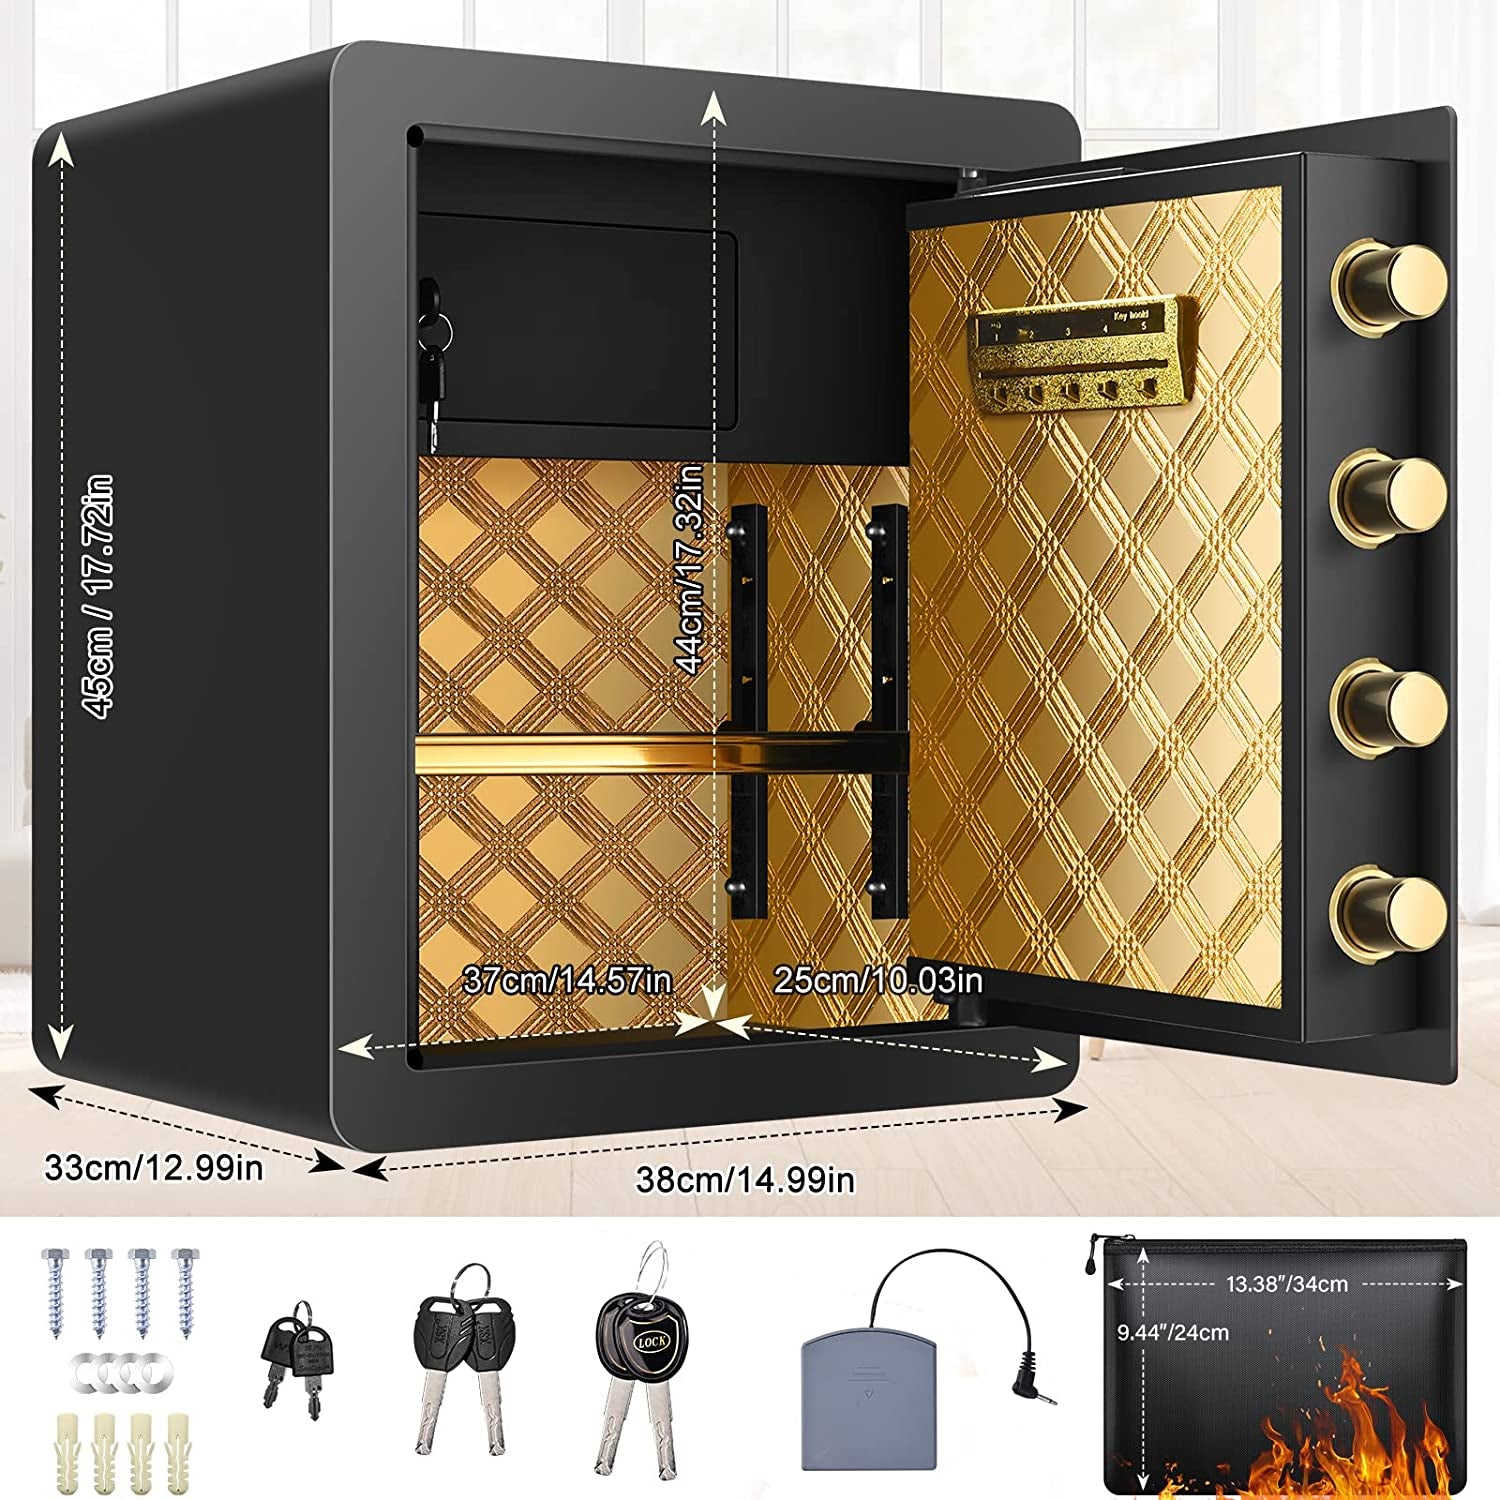 2.12 Cub Safe Box Fireproof Waterproof, Security Home Safe with Fireproof Document Bag, Large Fireproof Safe Box for Home with Inner Cabinet and LCD Display, Safe Box for Money Jewelry Documents